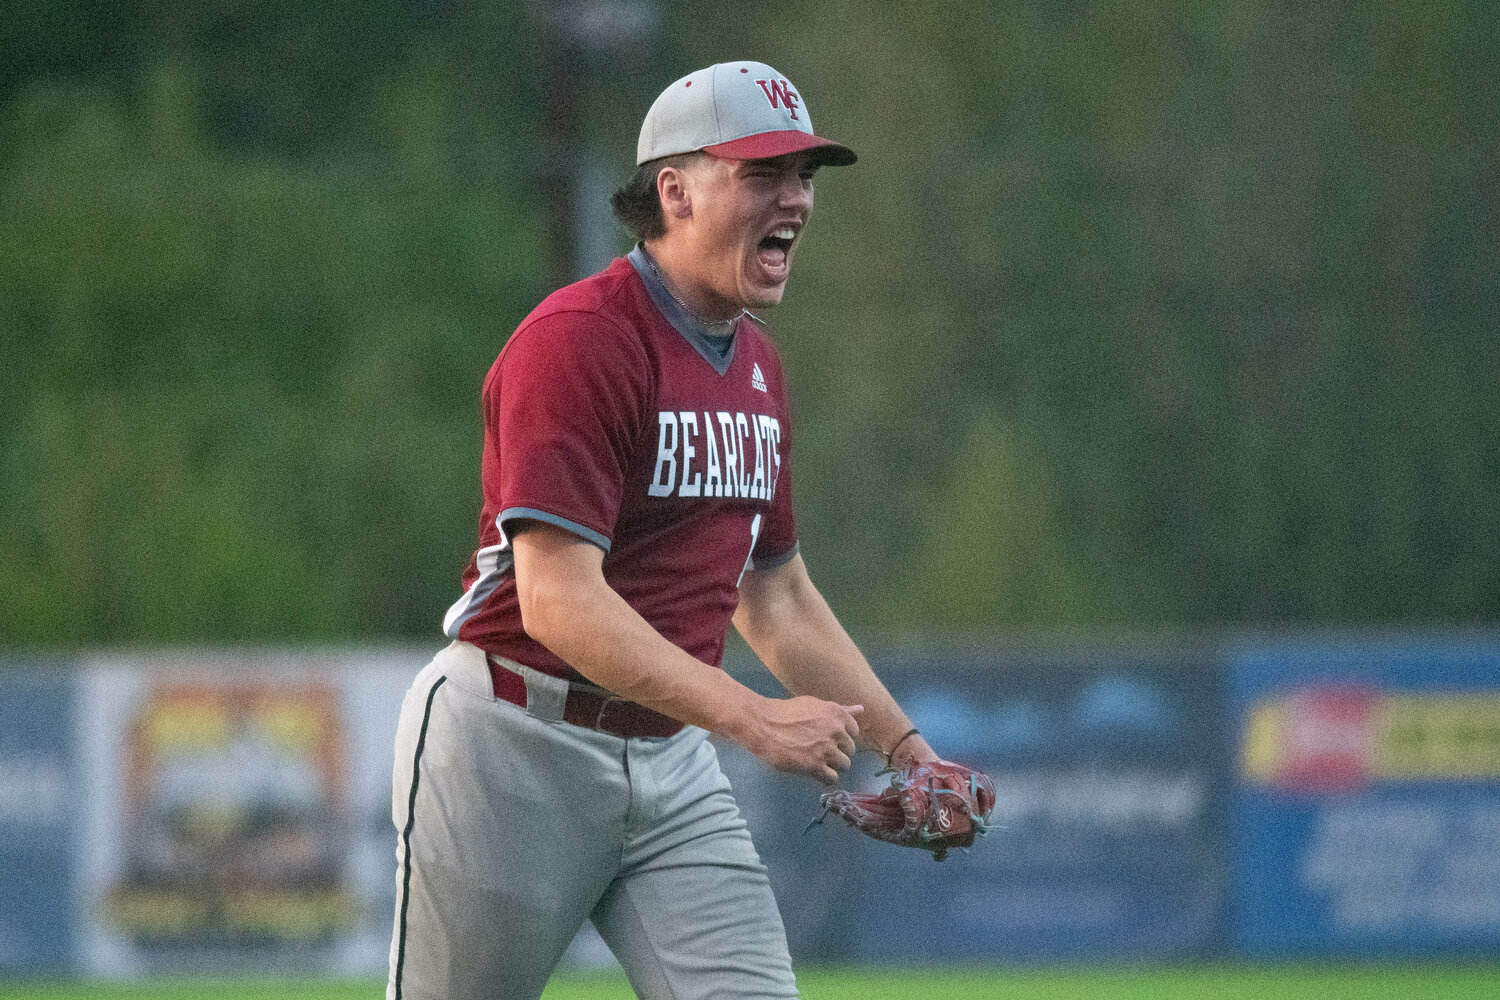 Riggs Westlund celebrates after getting W.F. West out of a bases-loaded jam in the sixthing inning of the Bearcats' 9-0 win over Ridgefield in the 2A District 4 Tournament semifinals, May 10 at the RORC.